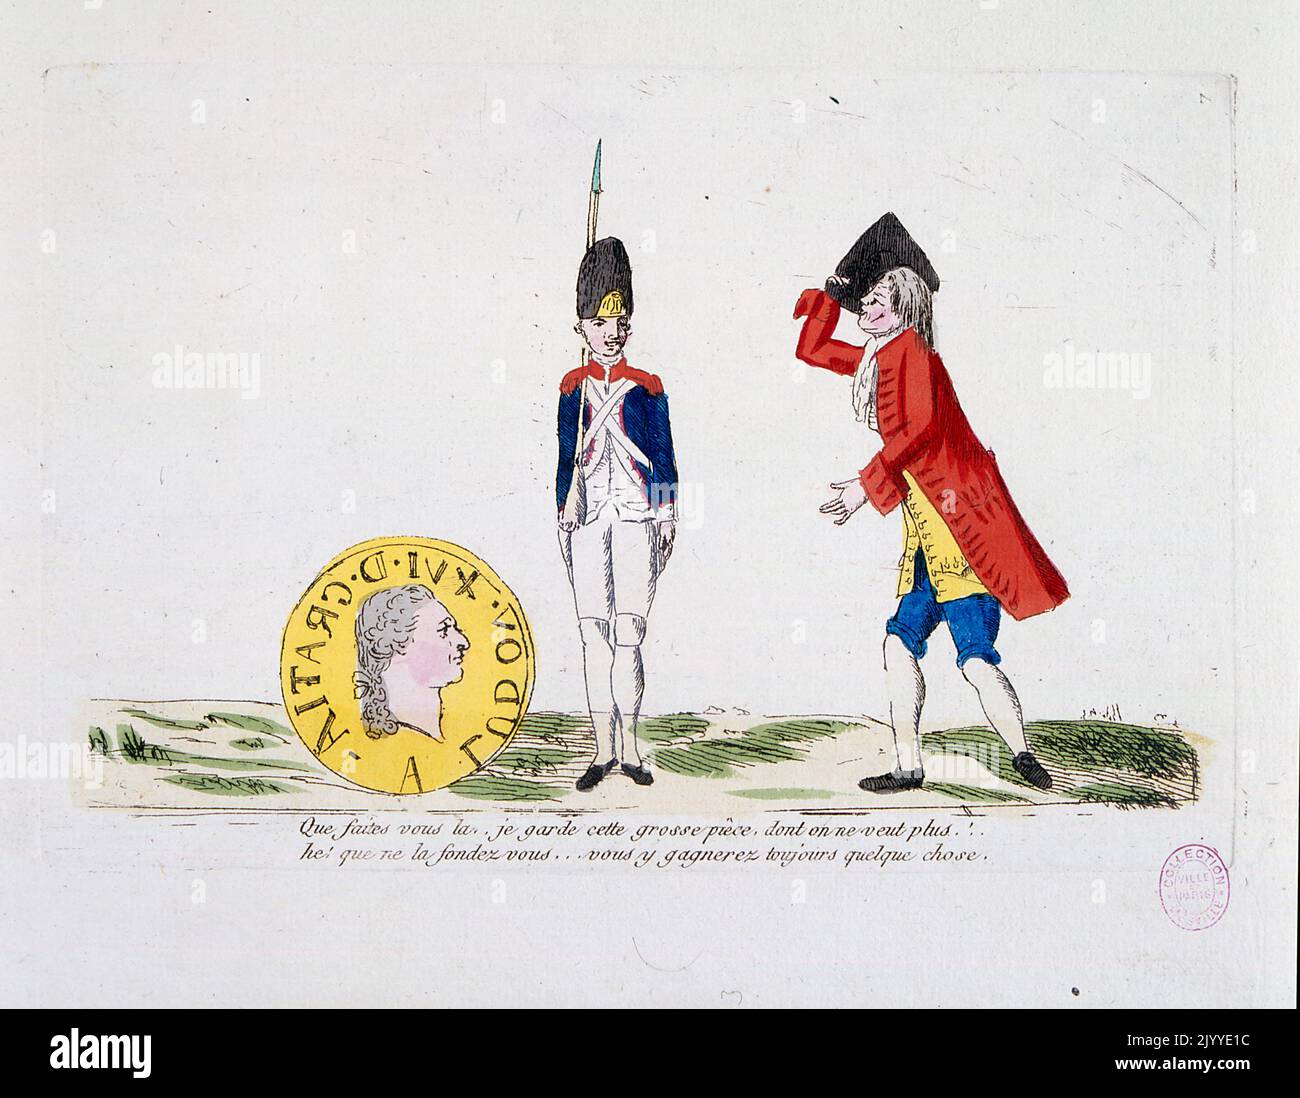 Satirical Illustration depicting of an exchange between a guard and an aristocrat. Stock Photo